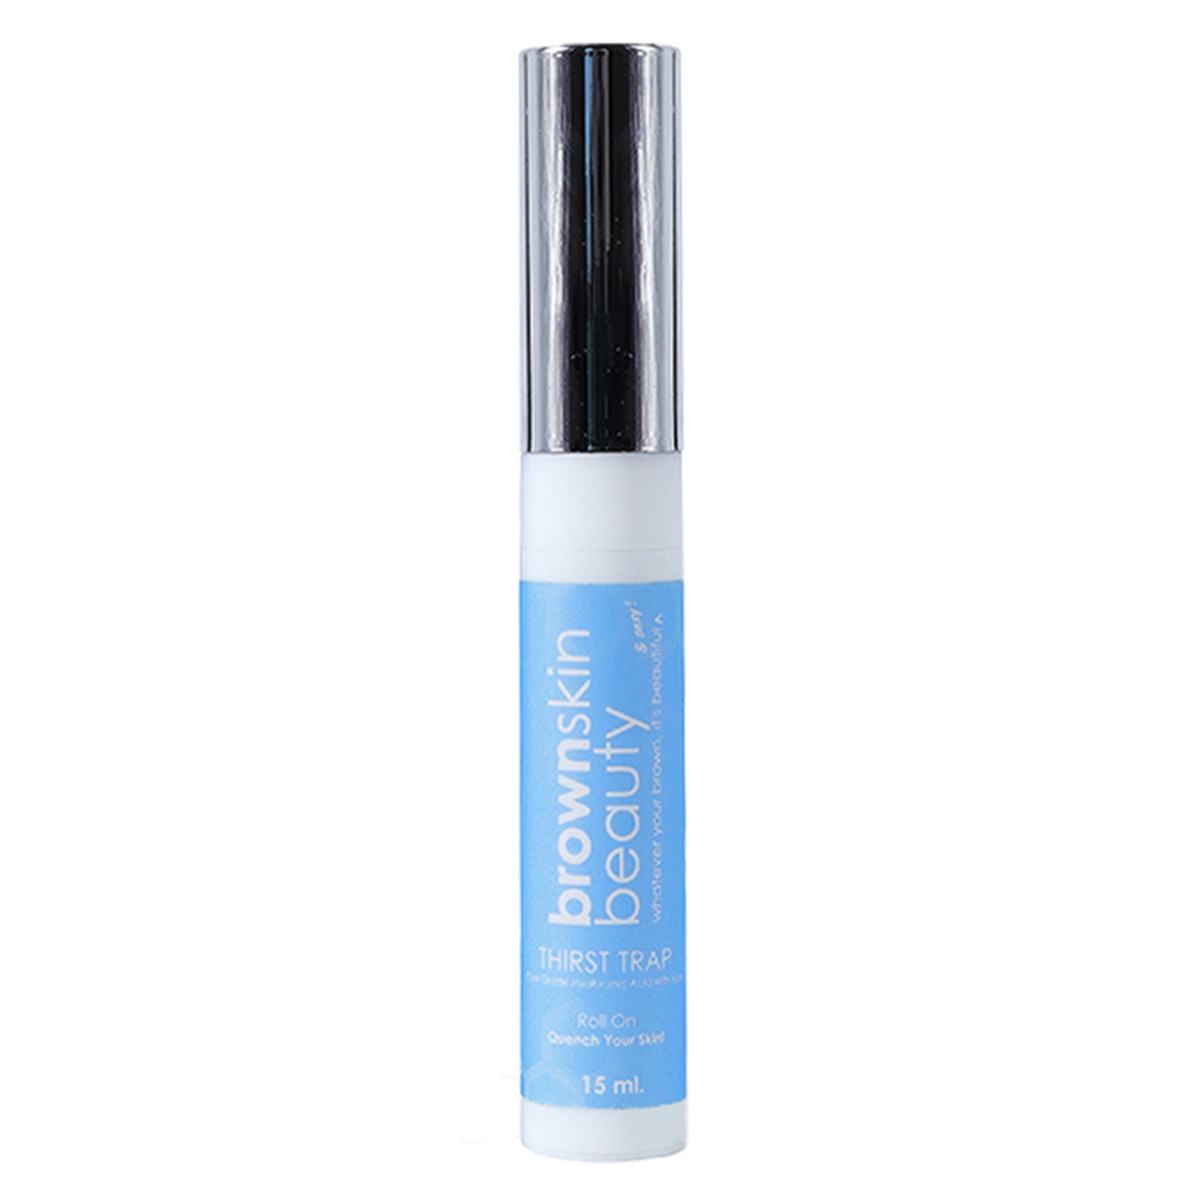 BrownSkin Beauty Thirst Trap Roll On, 15ml